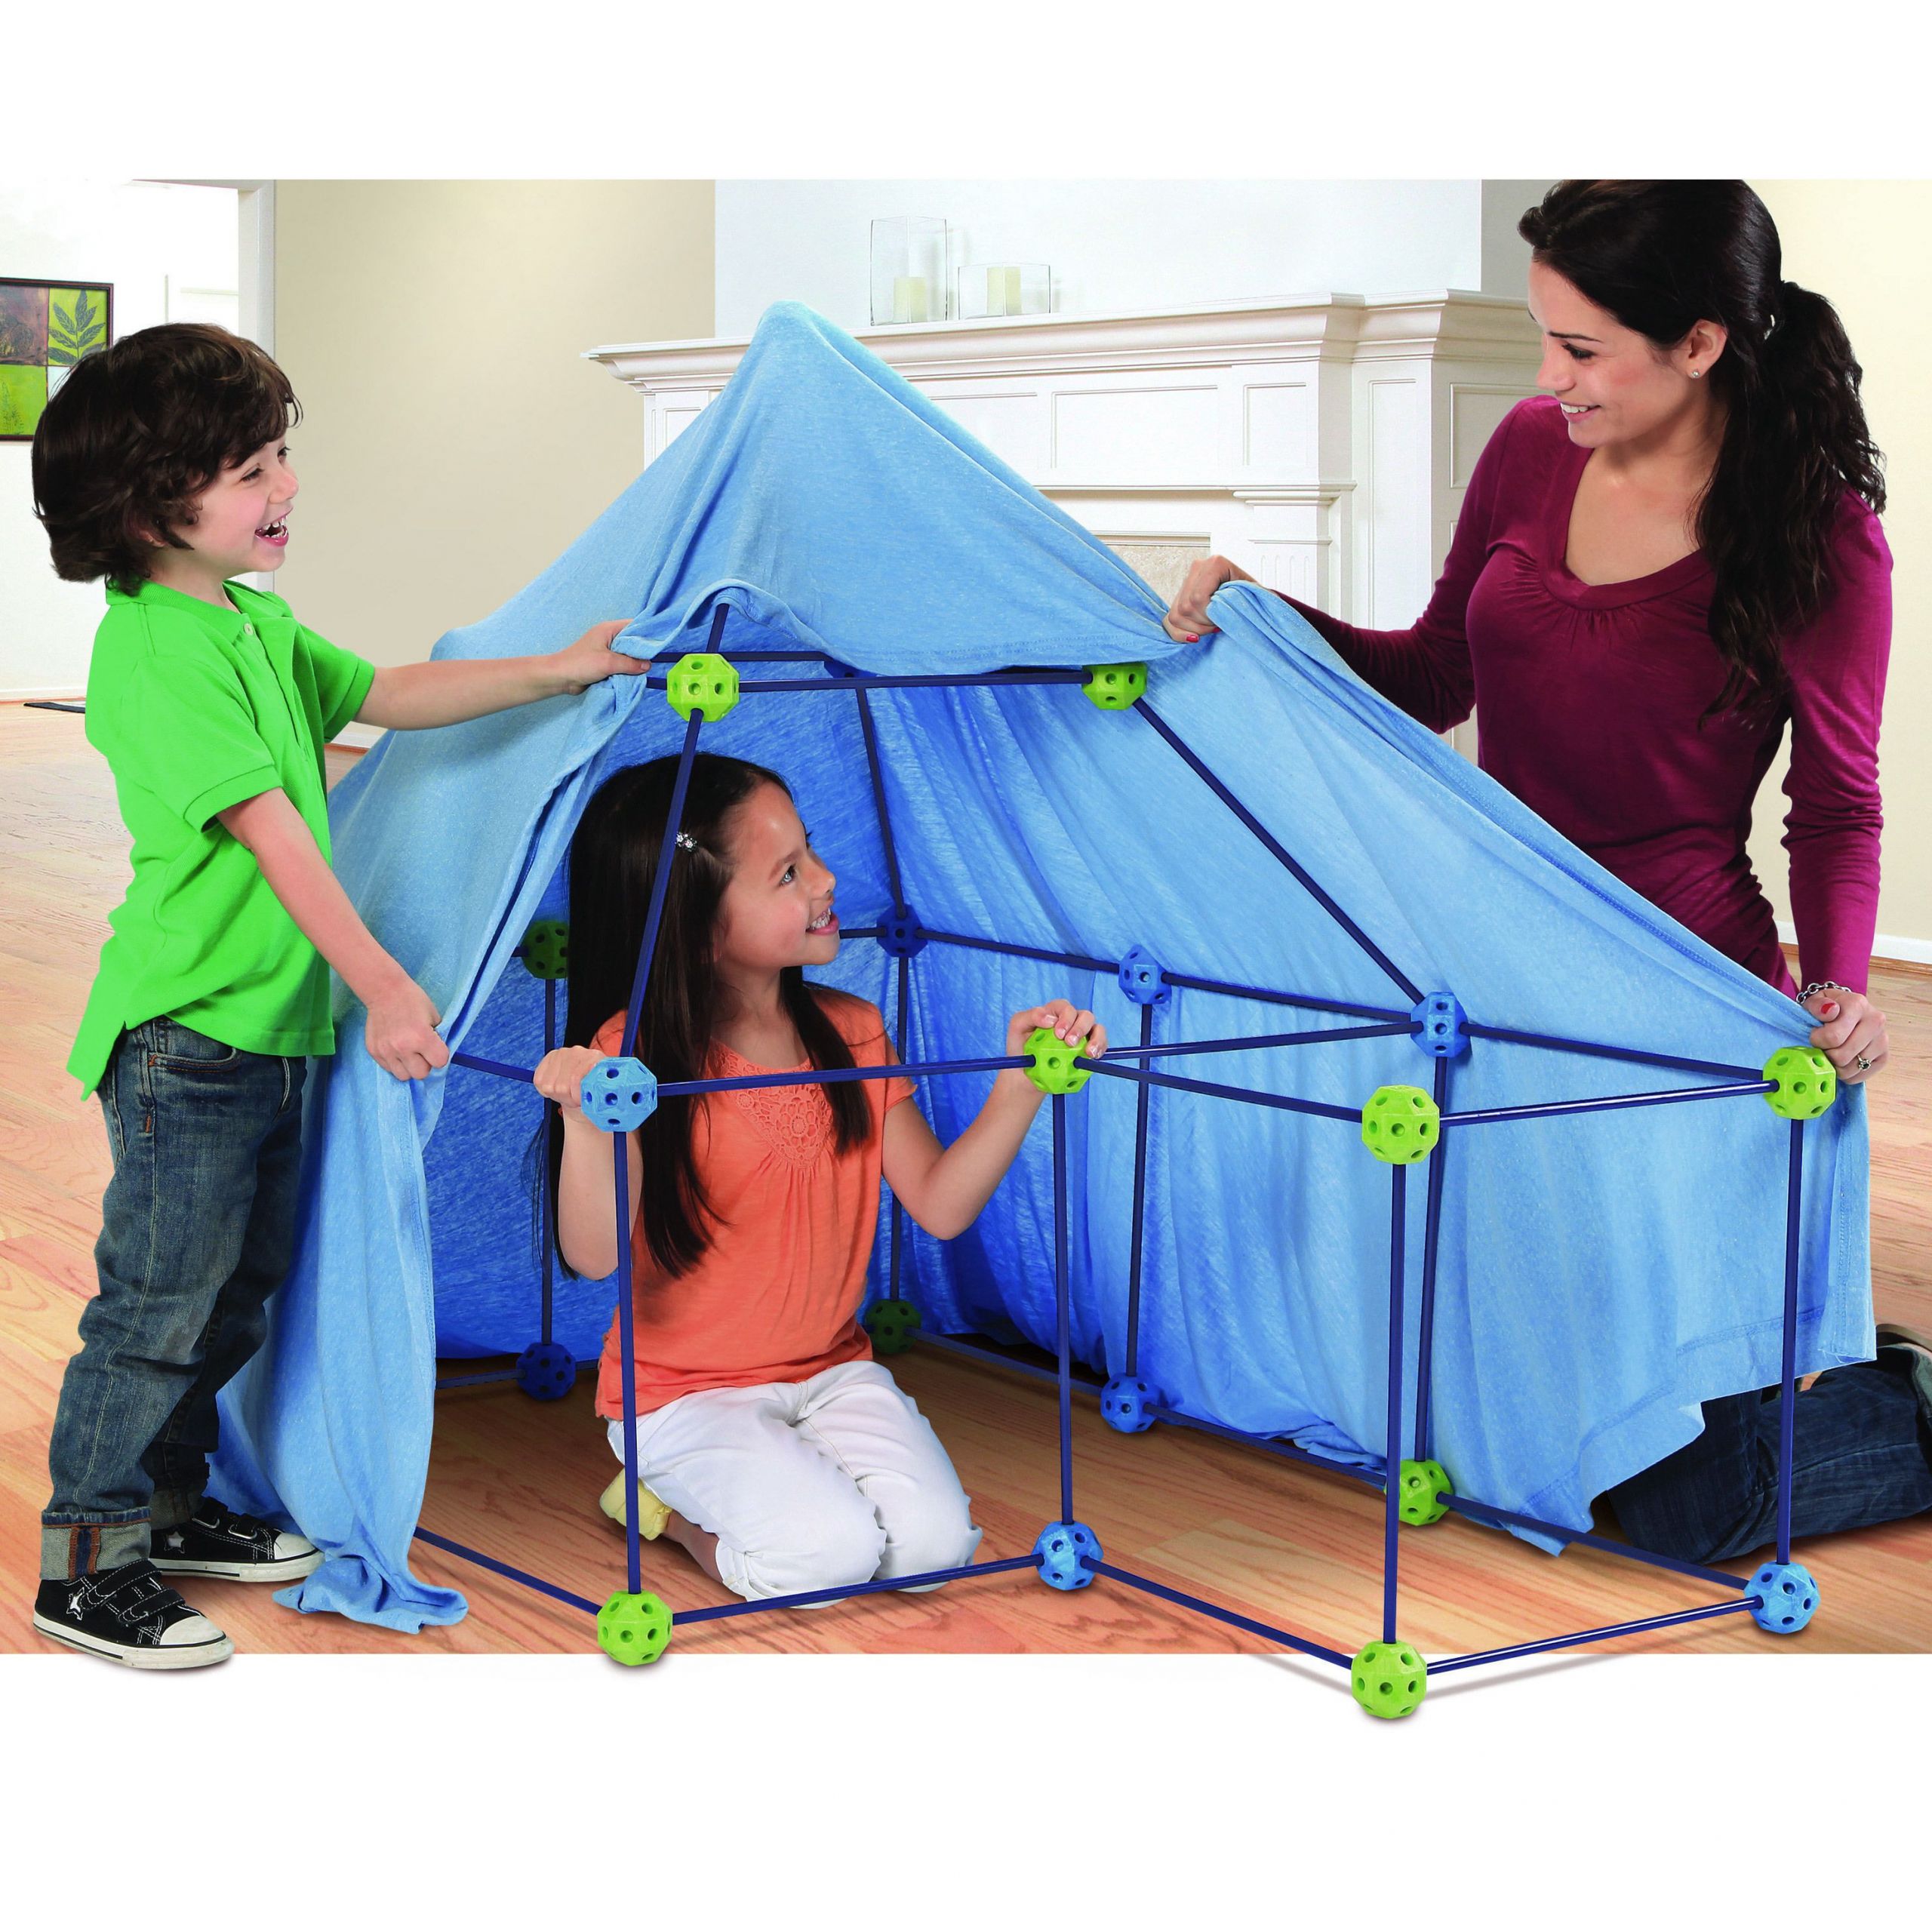 Kids Indoor Fort Kits
 Bring excitement to a rainy day with this Discovery Kids